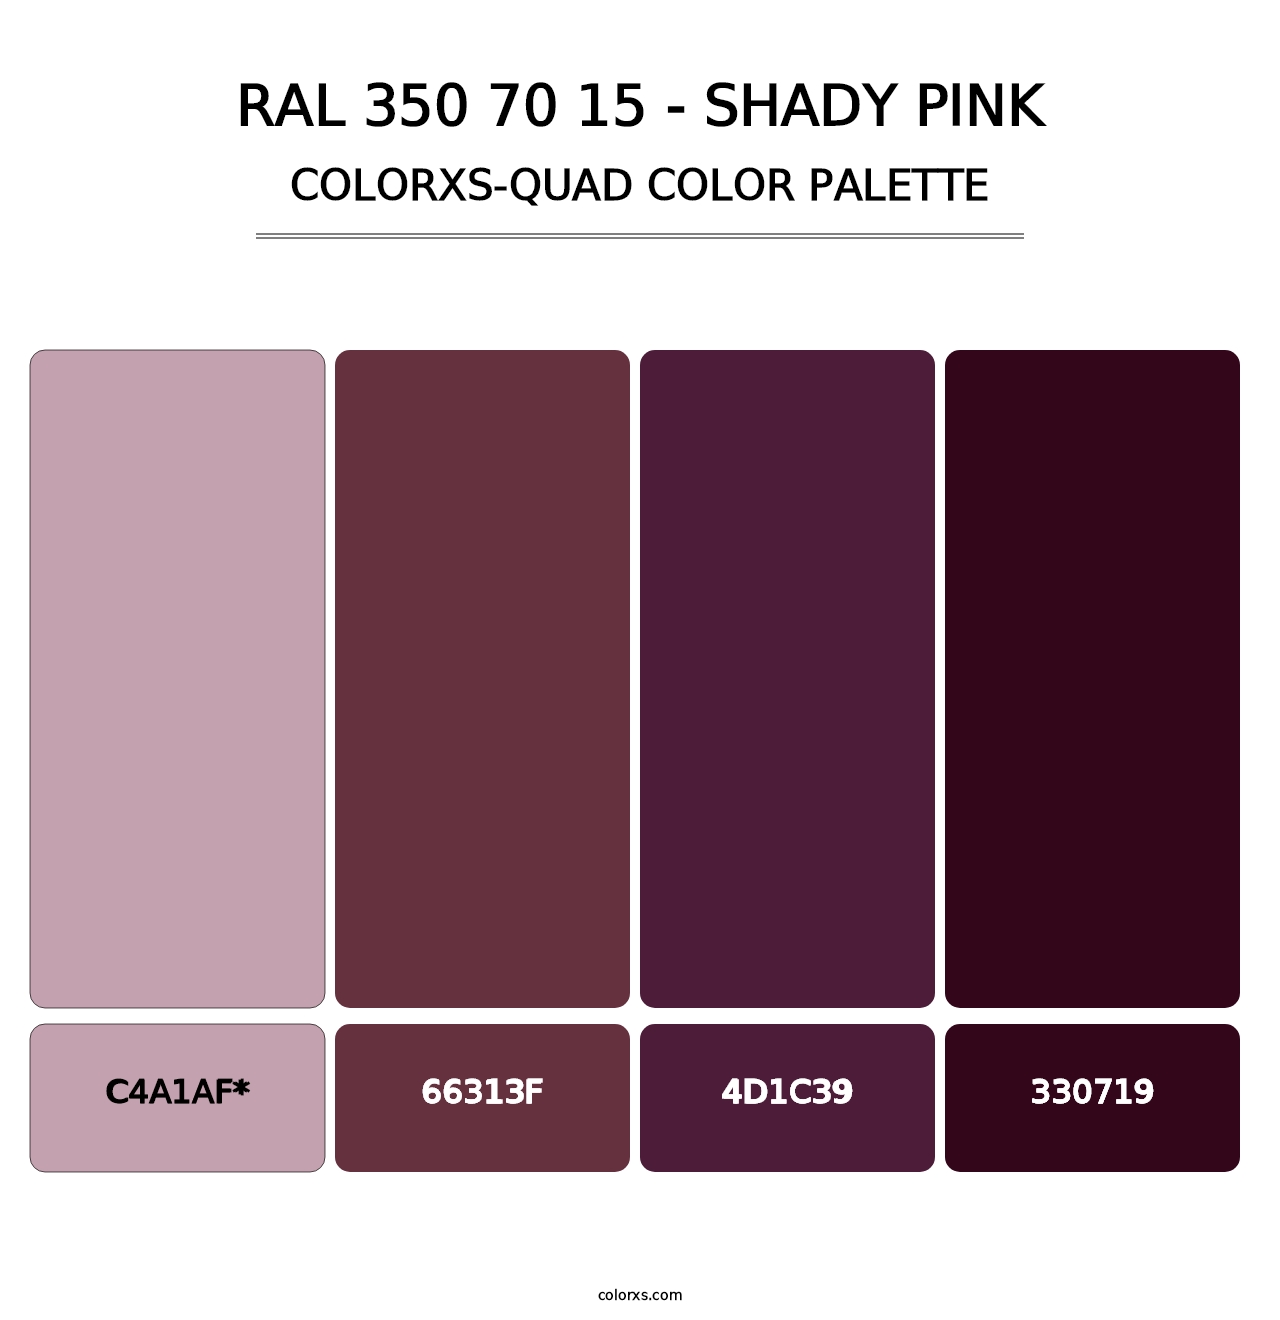 RAL 350 70 15 - Shady Pink - Colorxs Quad Palette